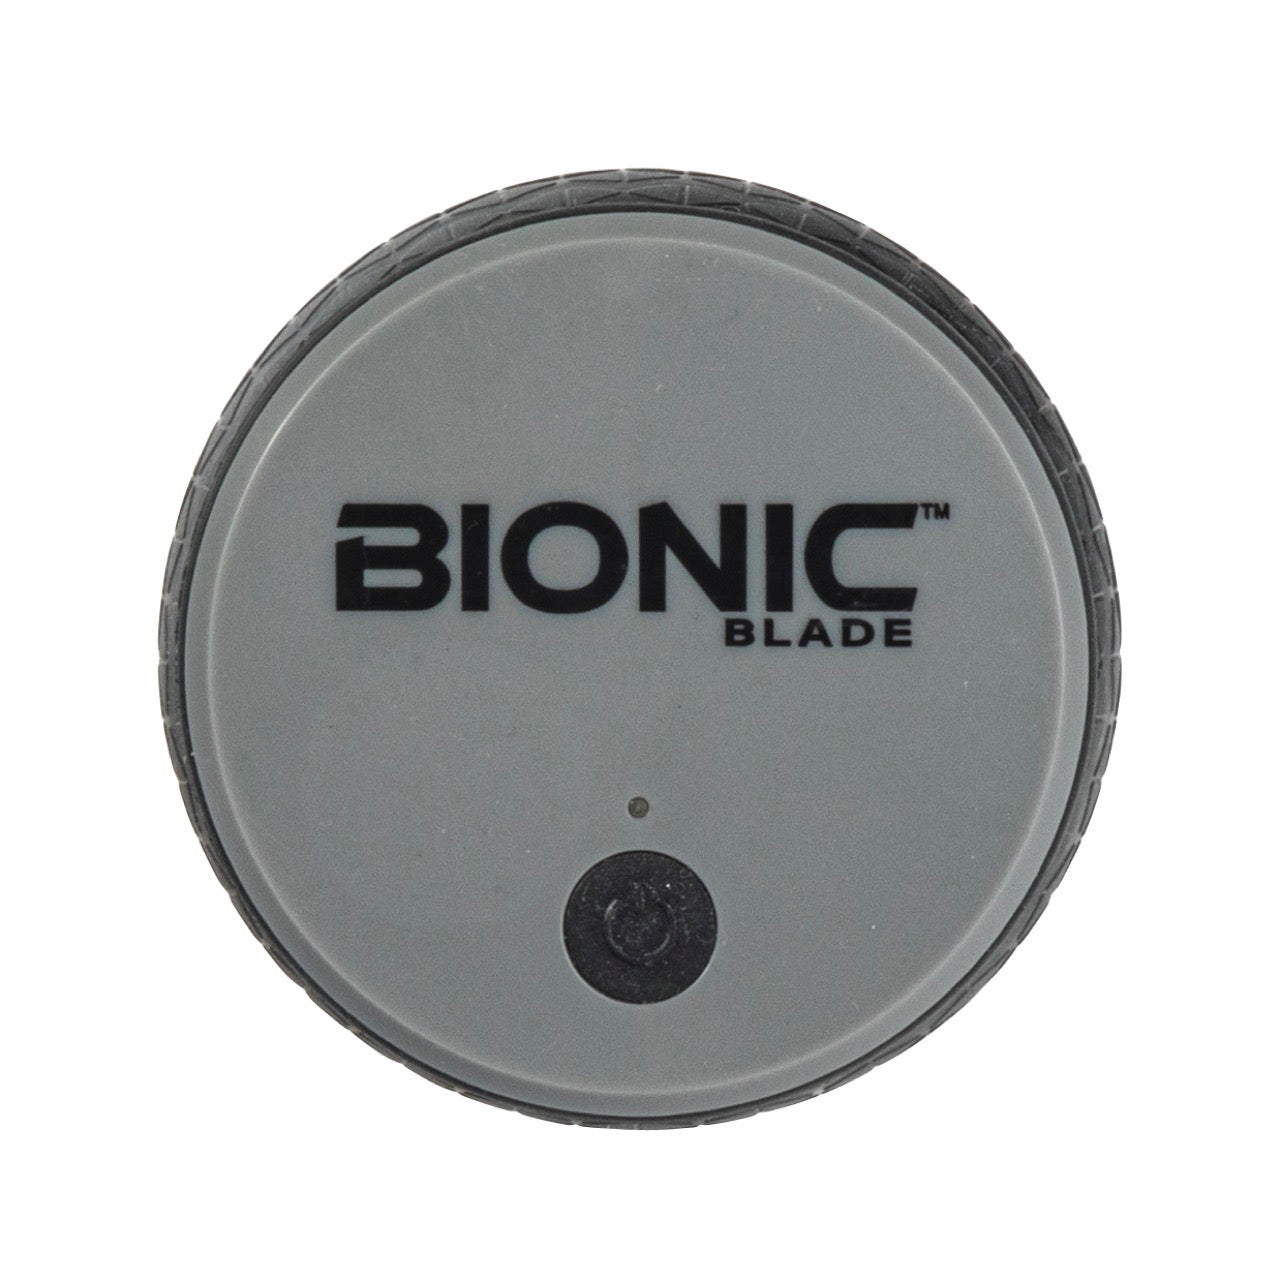 Bionic Blade Portable Blender - 18,000 RPM, USB Rechargeable